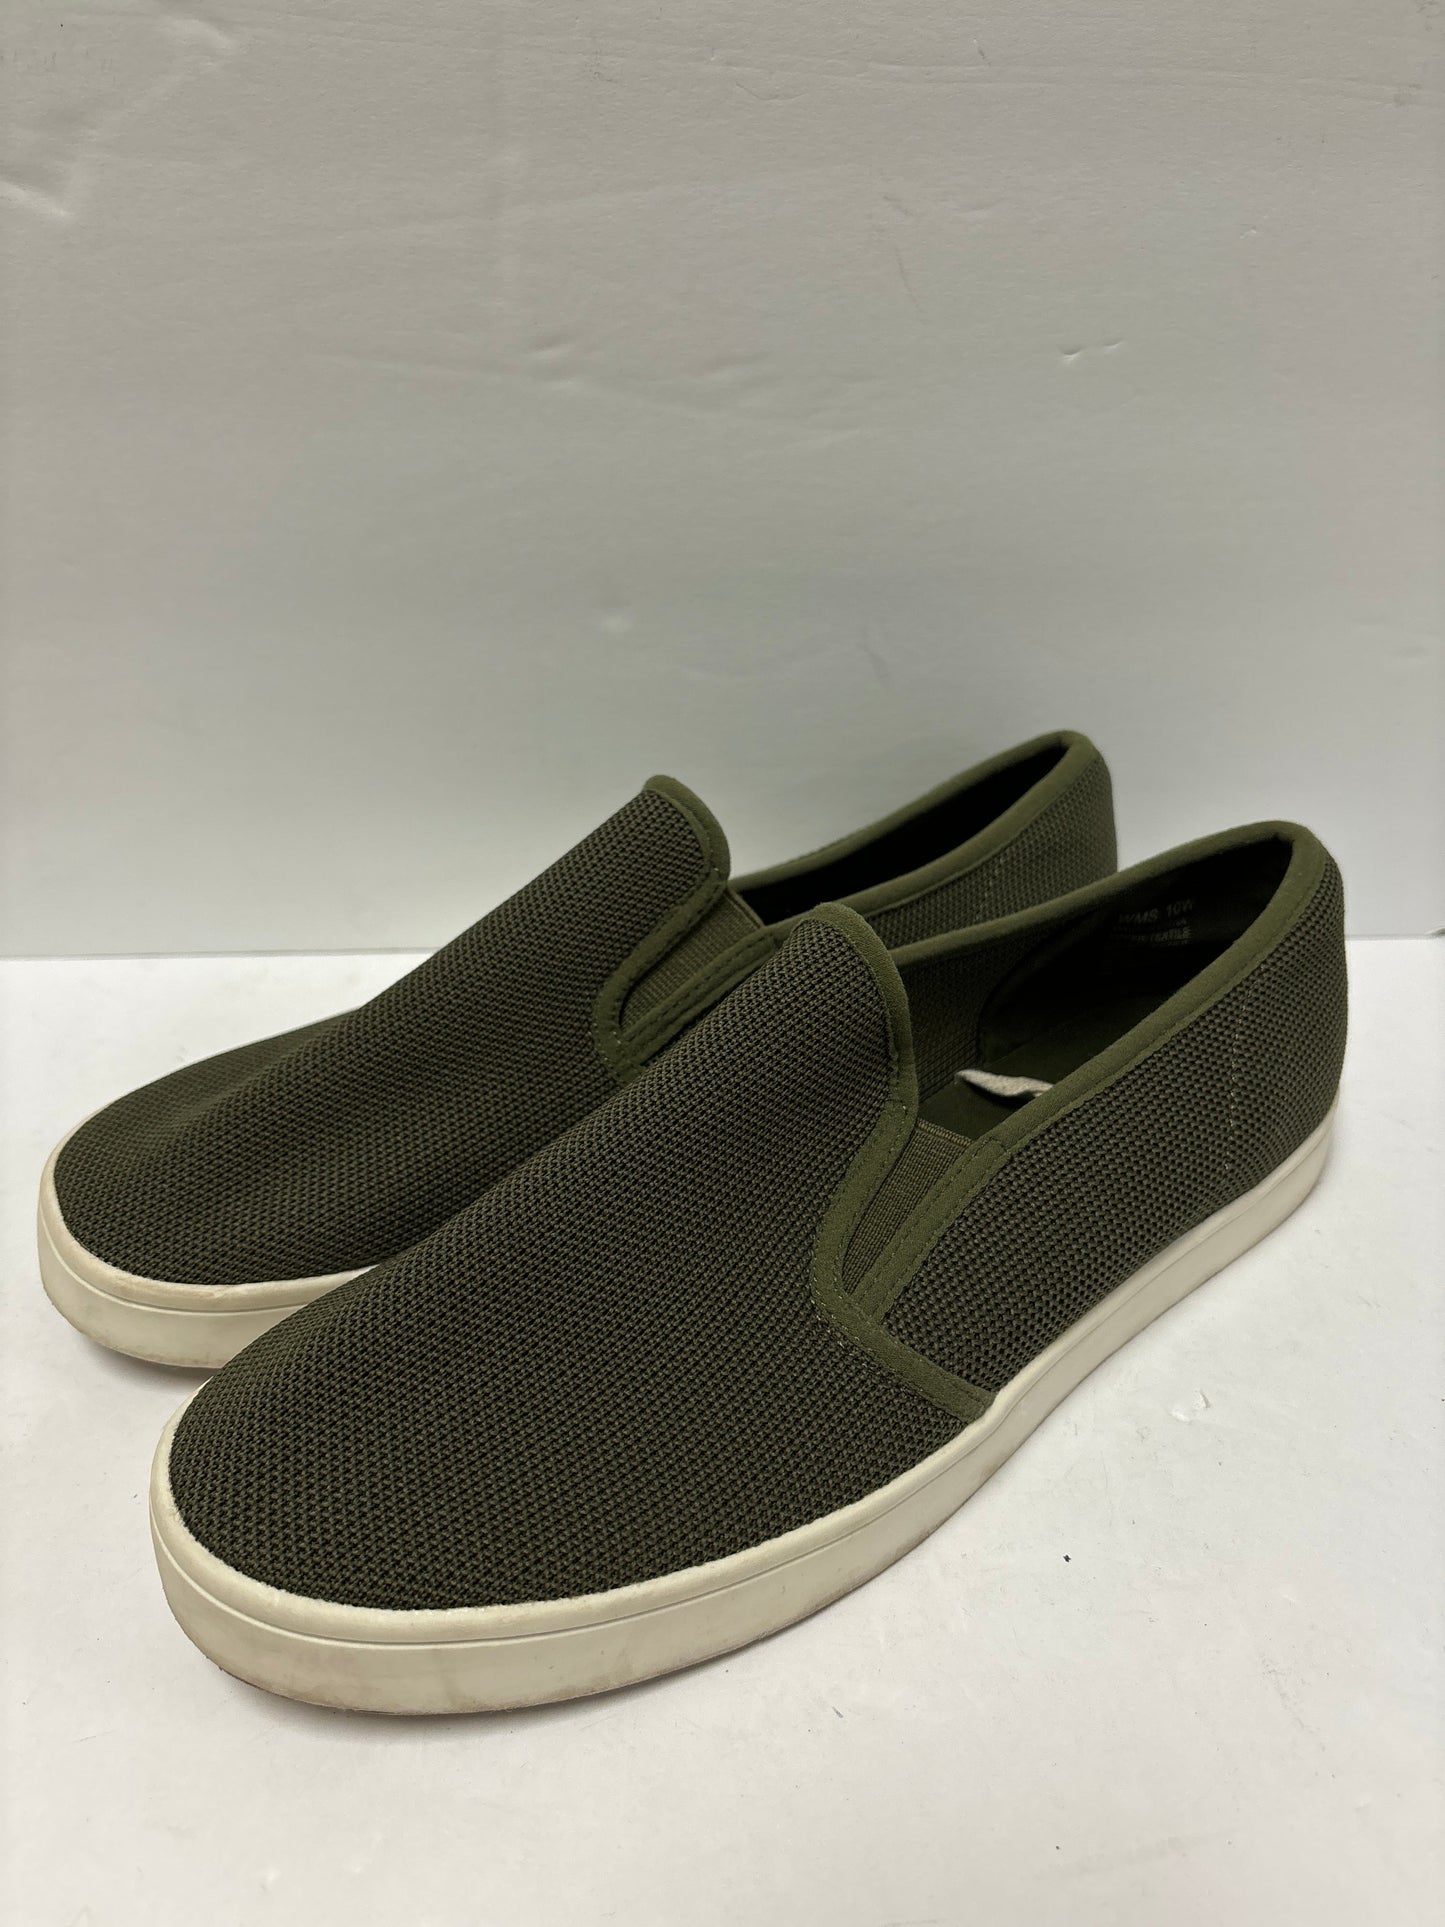 Green Shoes Flats Report, Size 10